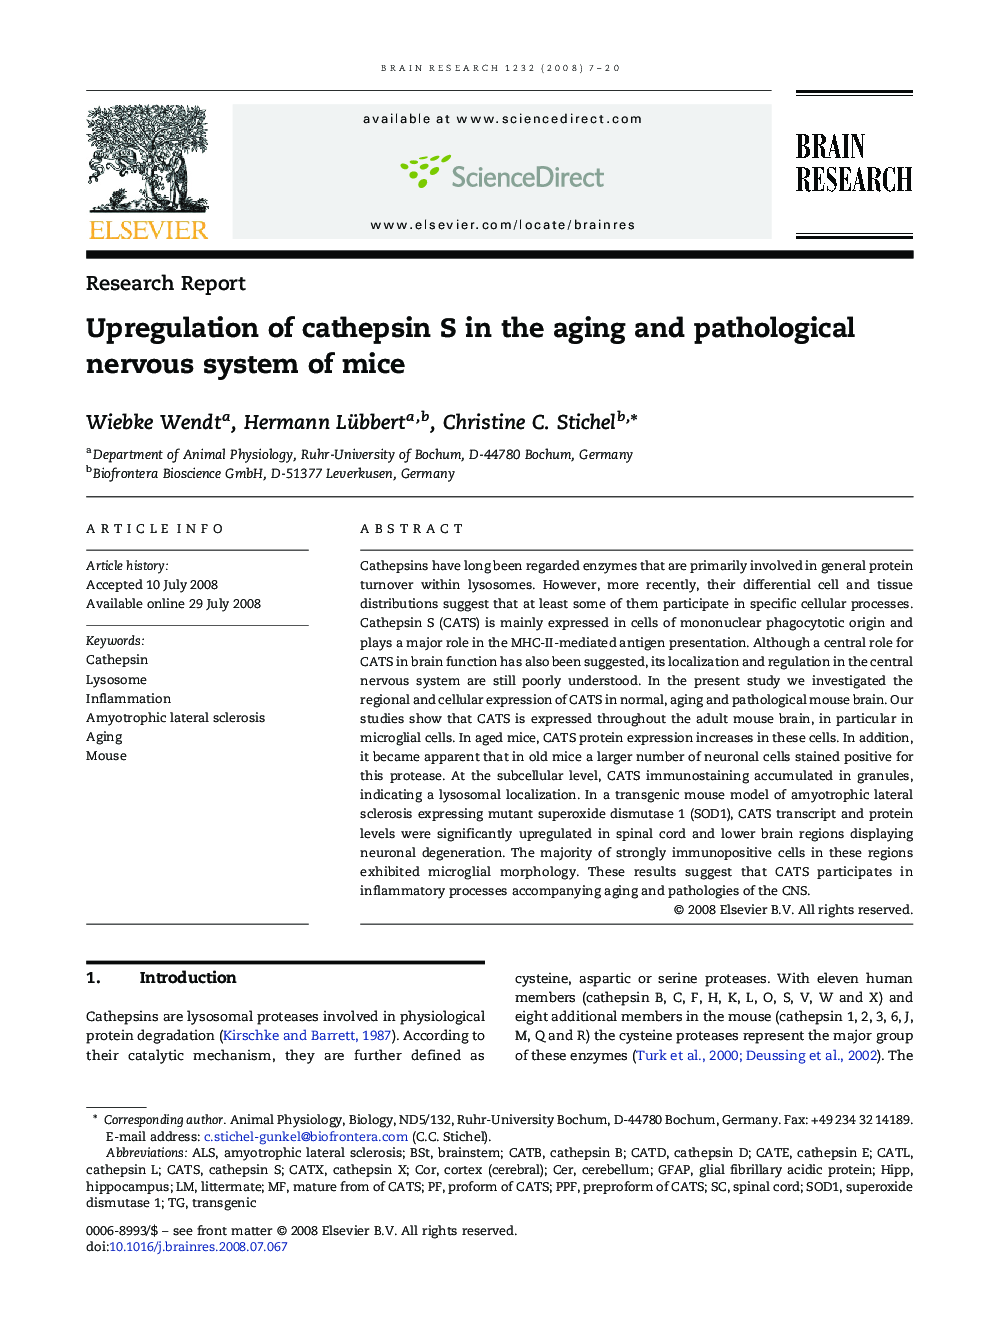 Upregulation of cathepsin S in the aging and pathological nervous system of mice